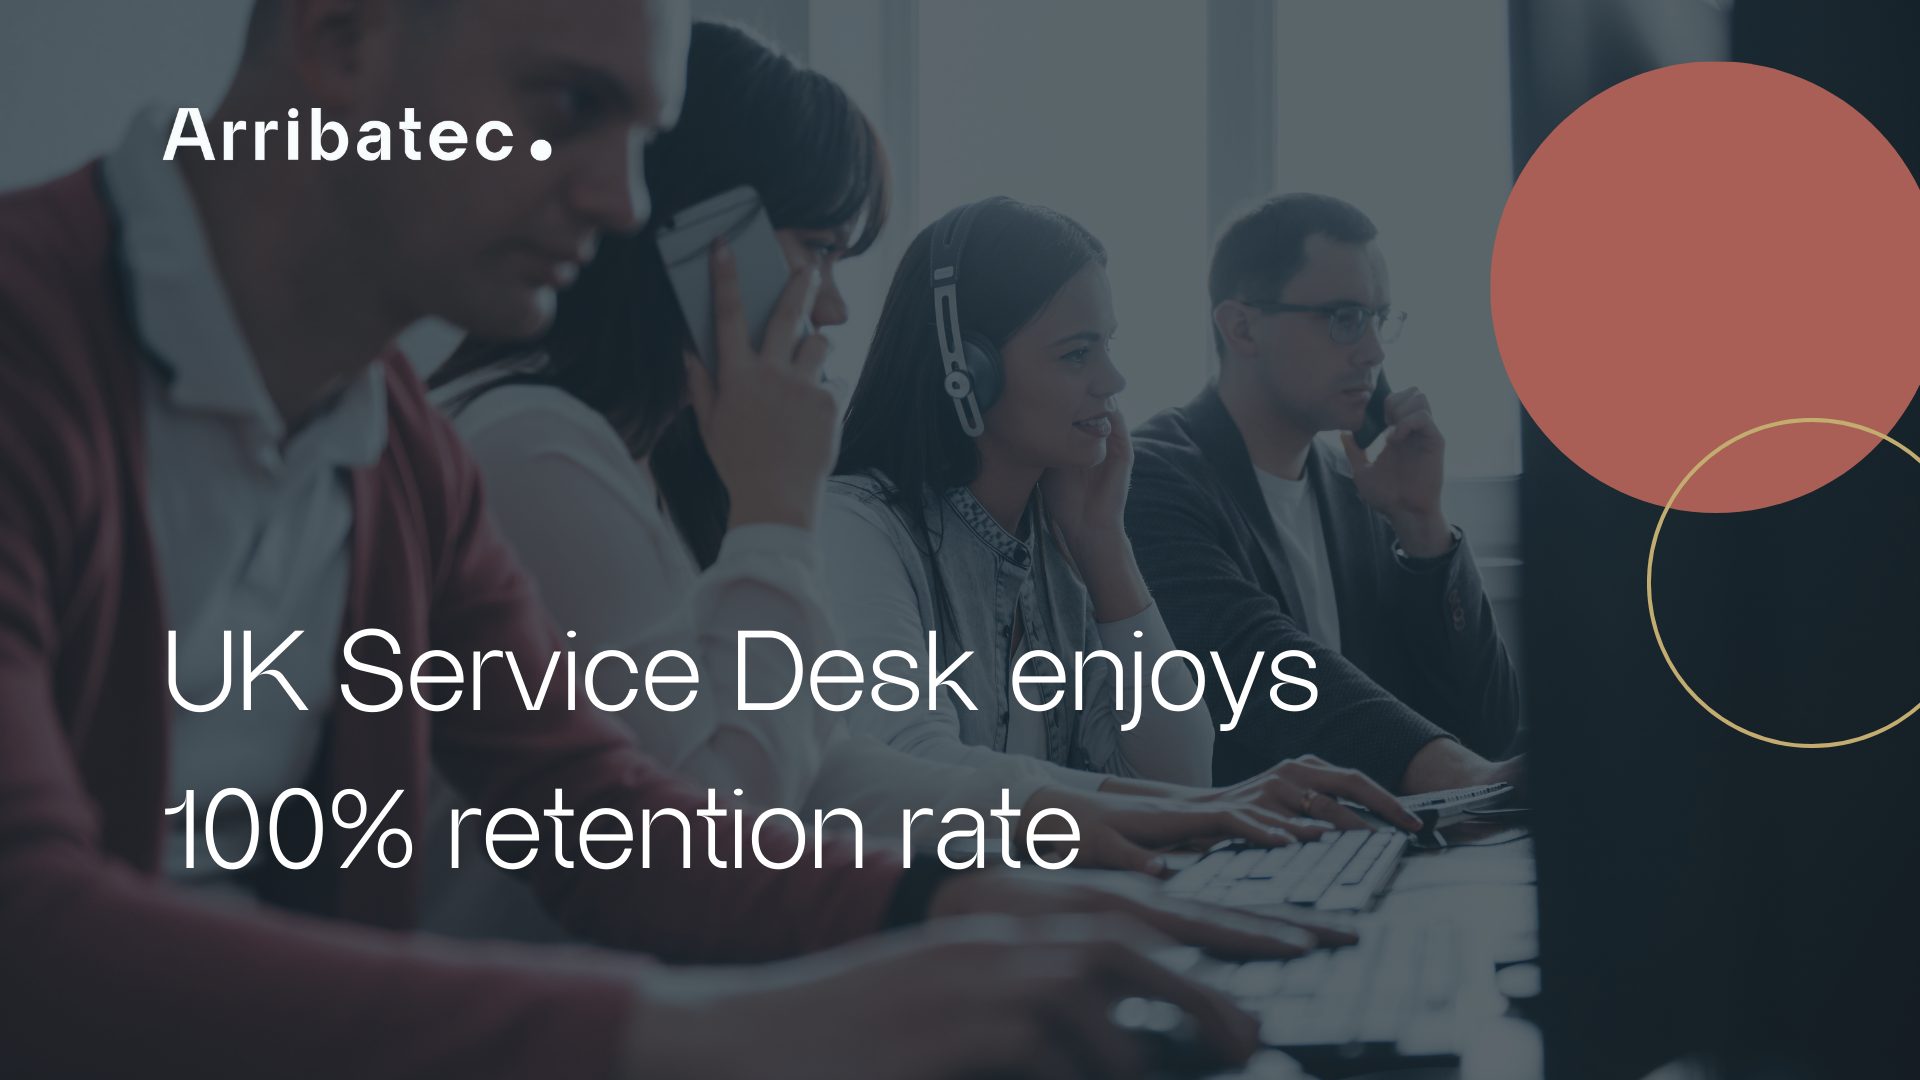 Our UK Service Desk has achieved a remarkable milestone: retaining 100% of our support desk clients